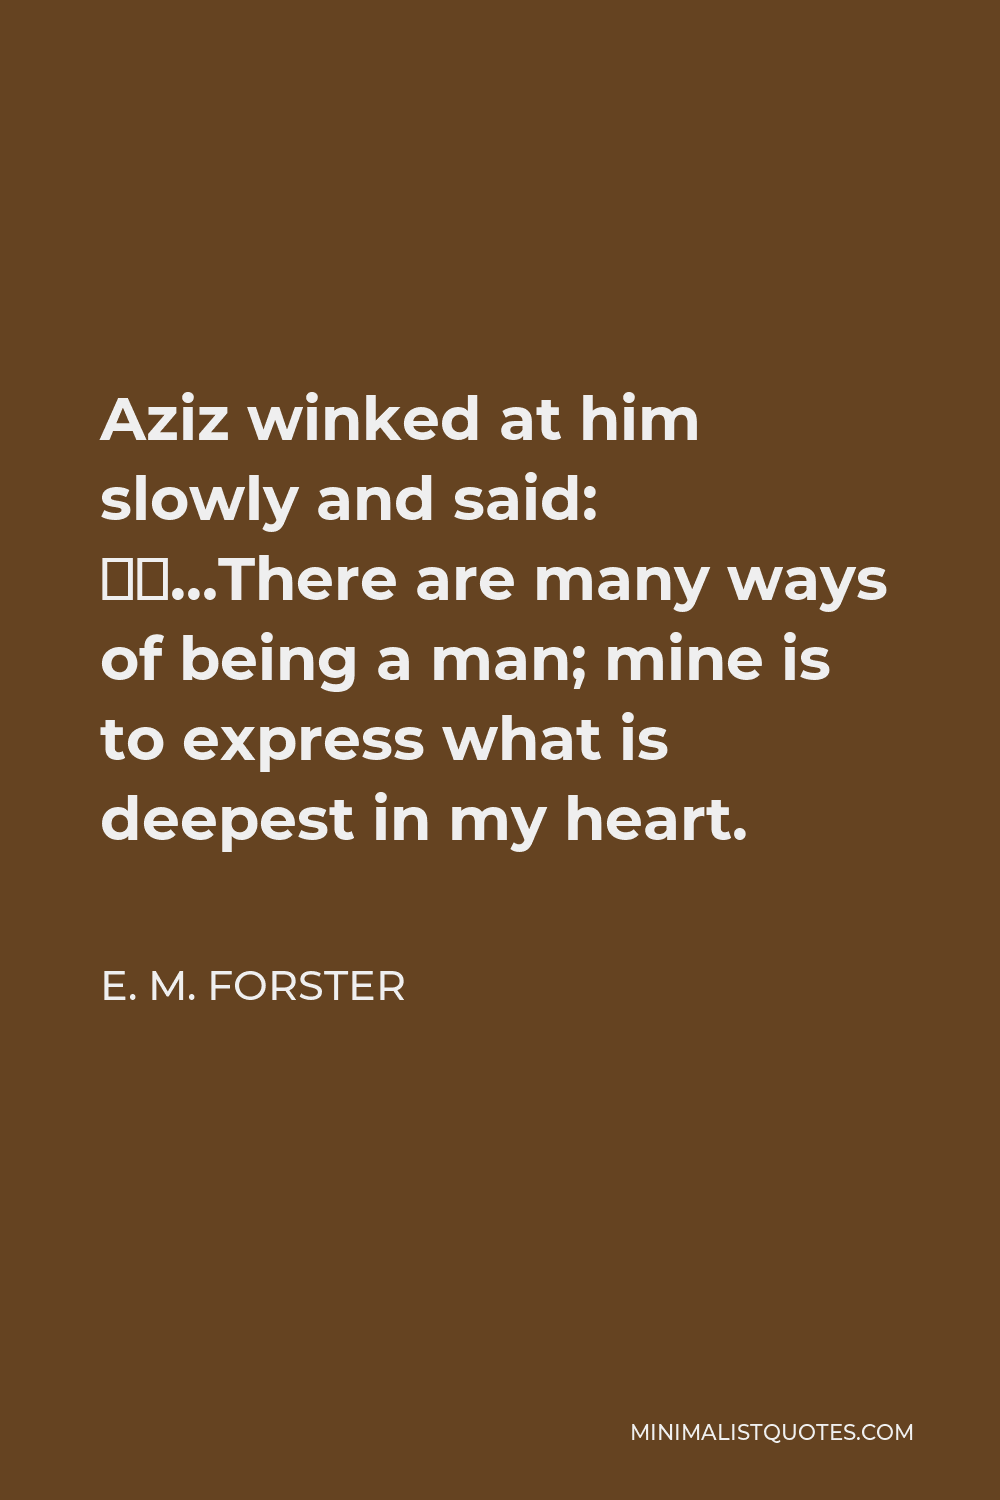 E. M. Forster Quote - Aziz winked at him slowly and said: “…There are many ways of being a man; mine is to express what is deepest in my heart.